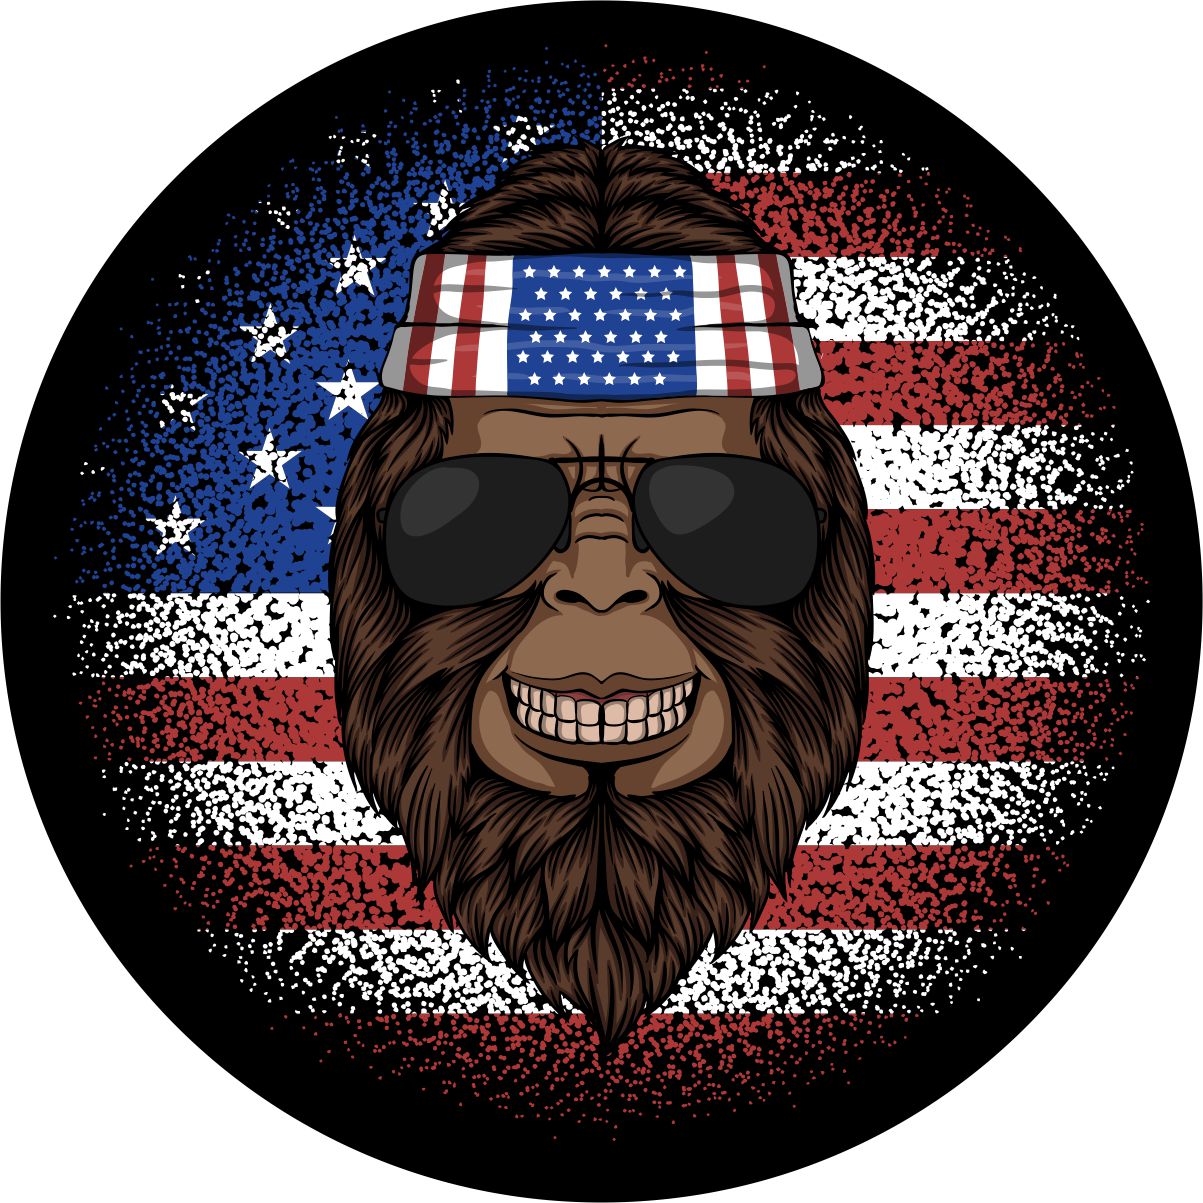 Smiling bigfoot sasquatch spare tire cover design. Bigfoot wearing an American flag bandana and sunglasses with the American flag is in the background with dispersion effect.